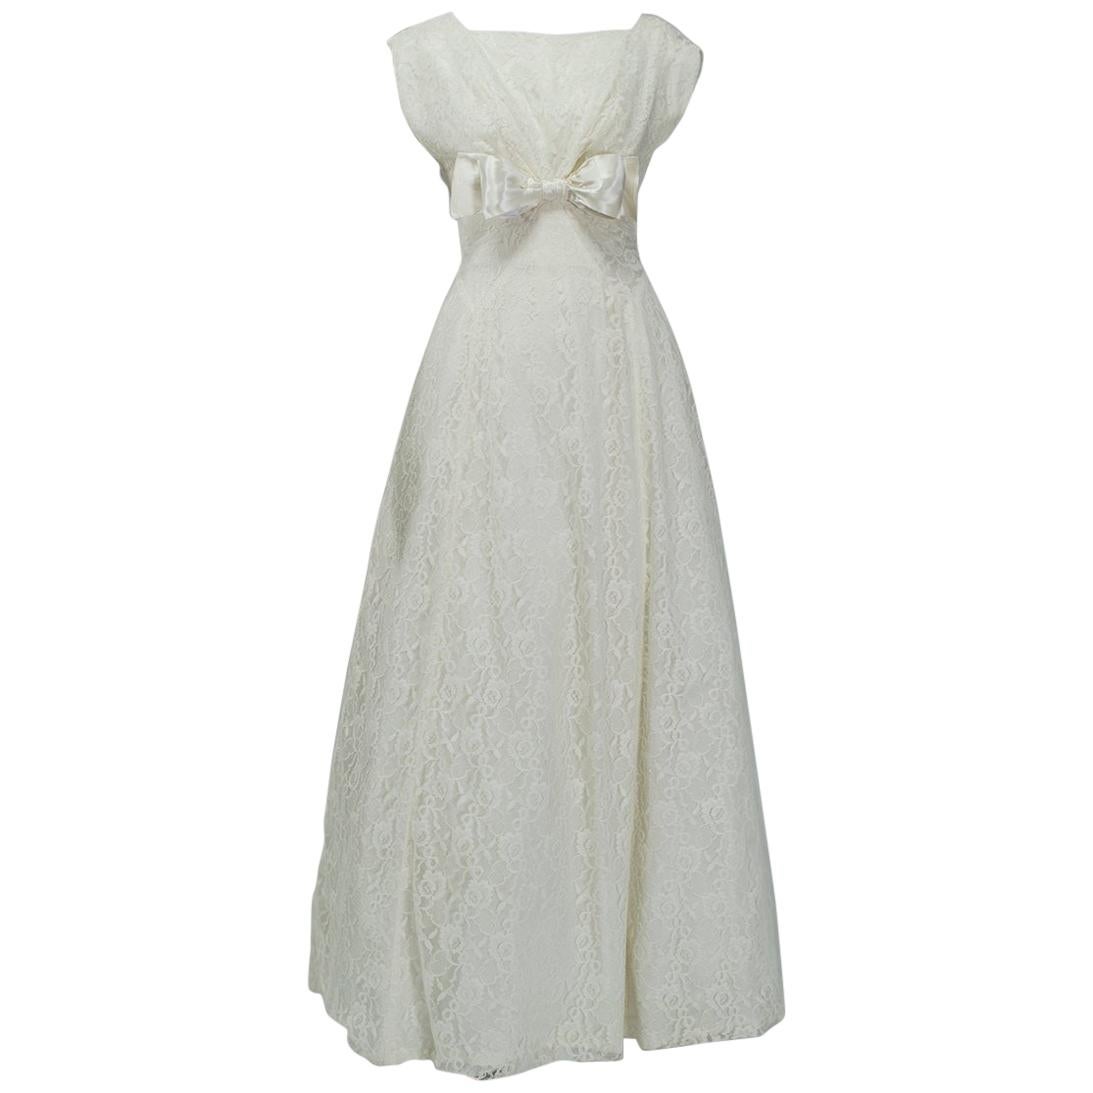 Emma Domb Ivory Lace Bateau Neck Wedding Gown with Bow - Small, 1950s